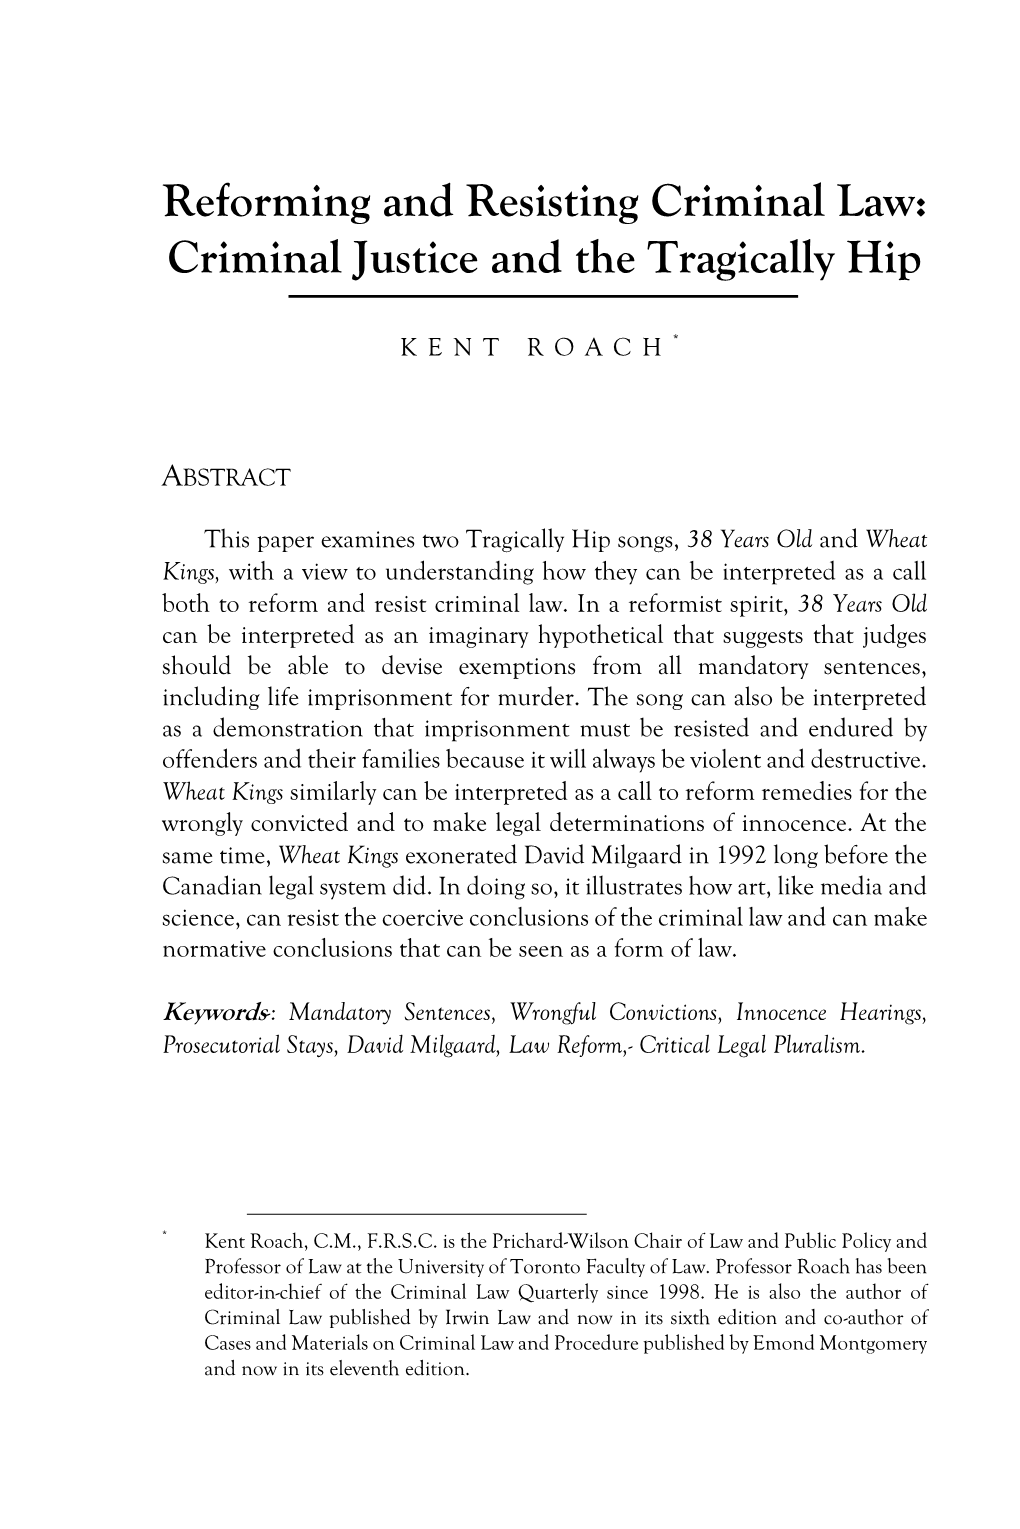 Criminal Justice and the Tragically Hip